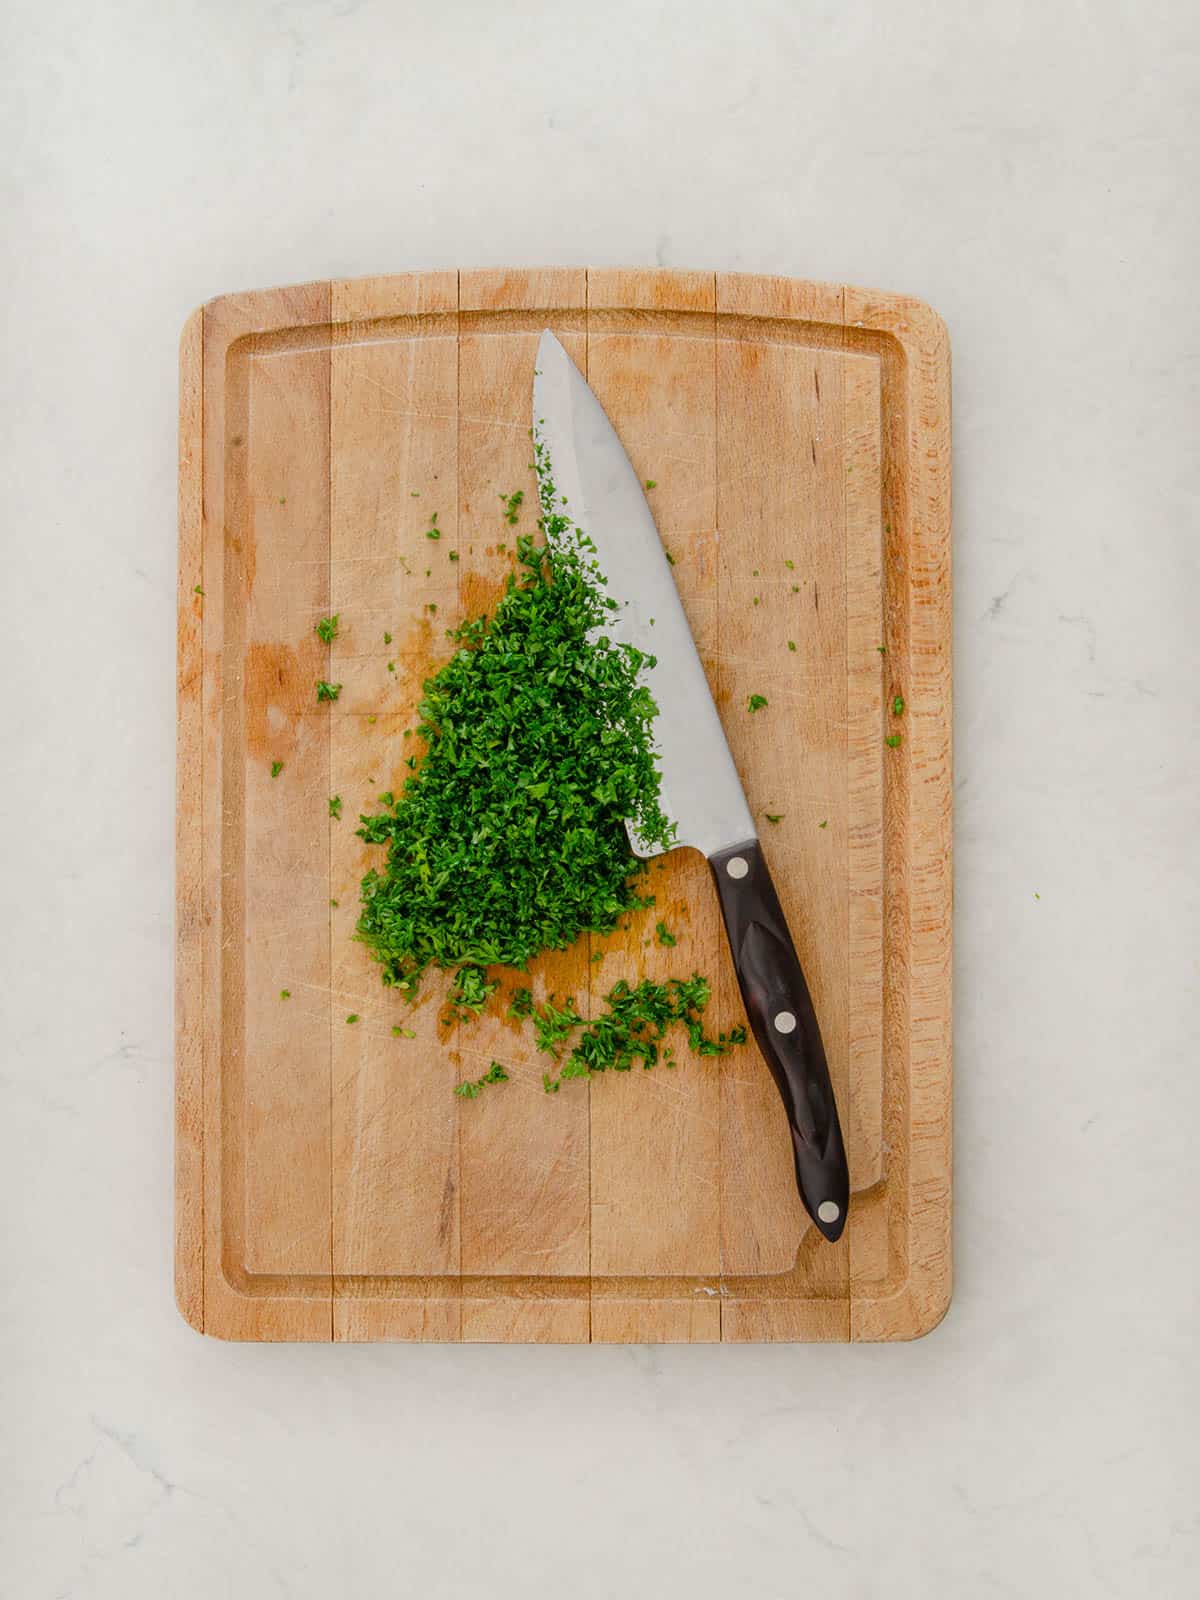 Chopped parsley on a cutting board with a knife.